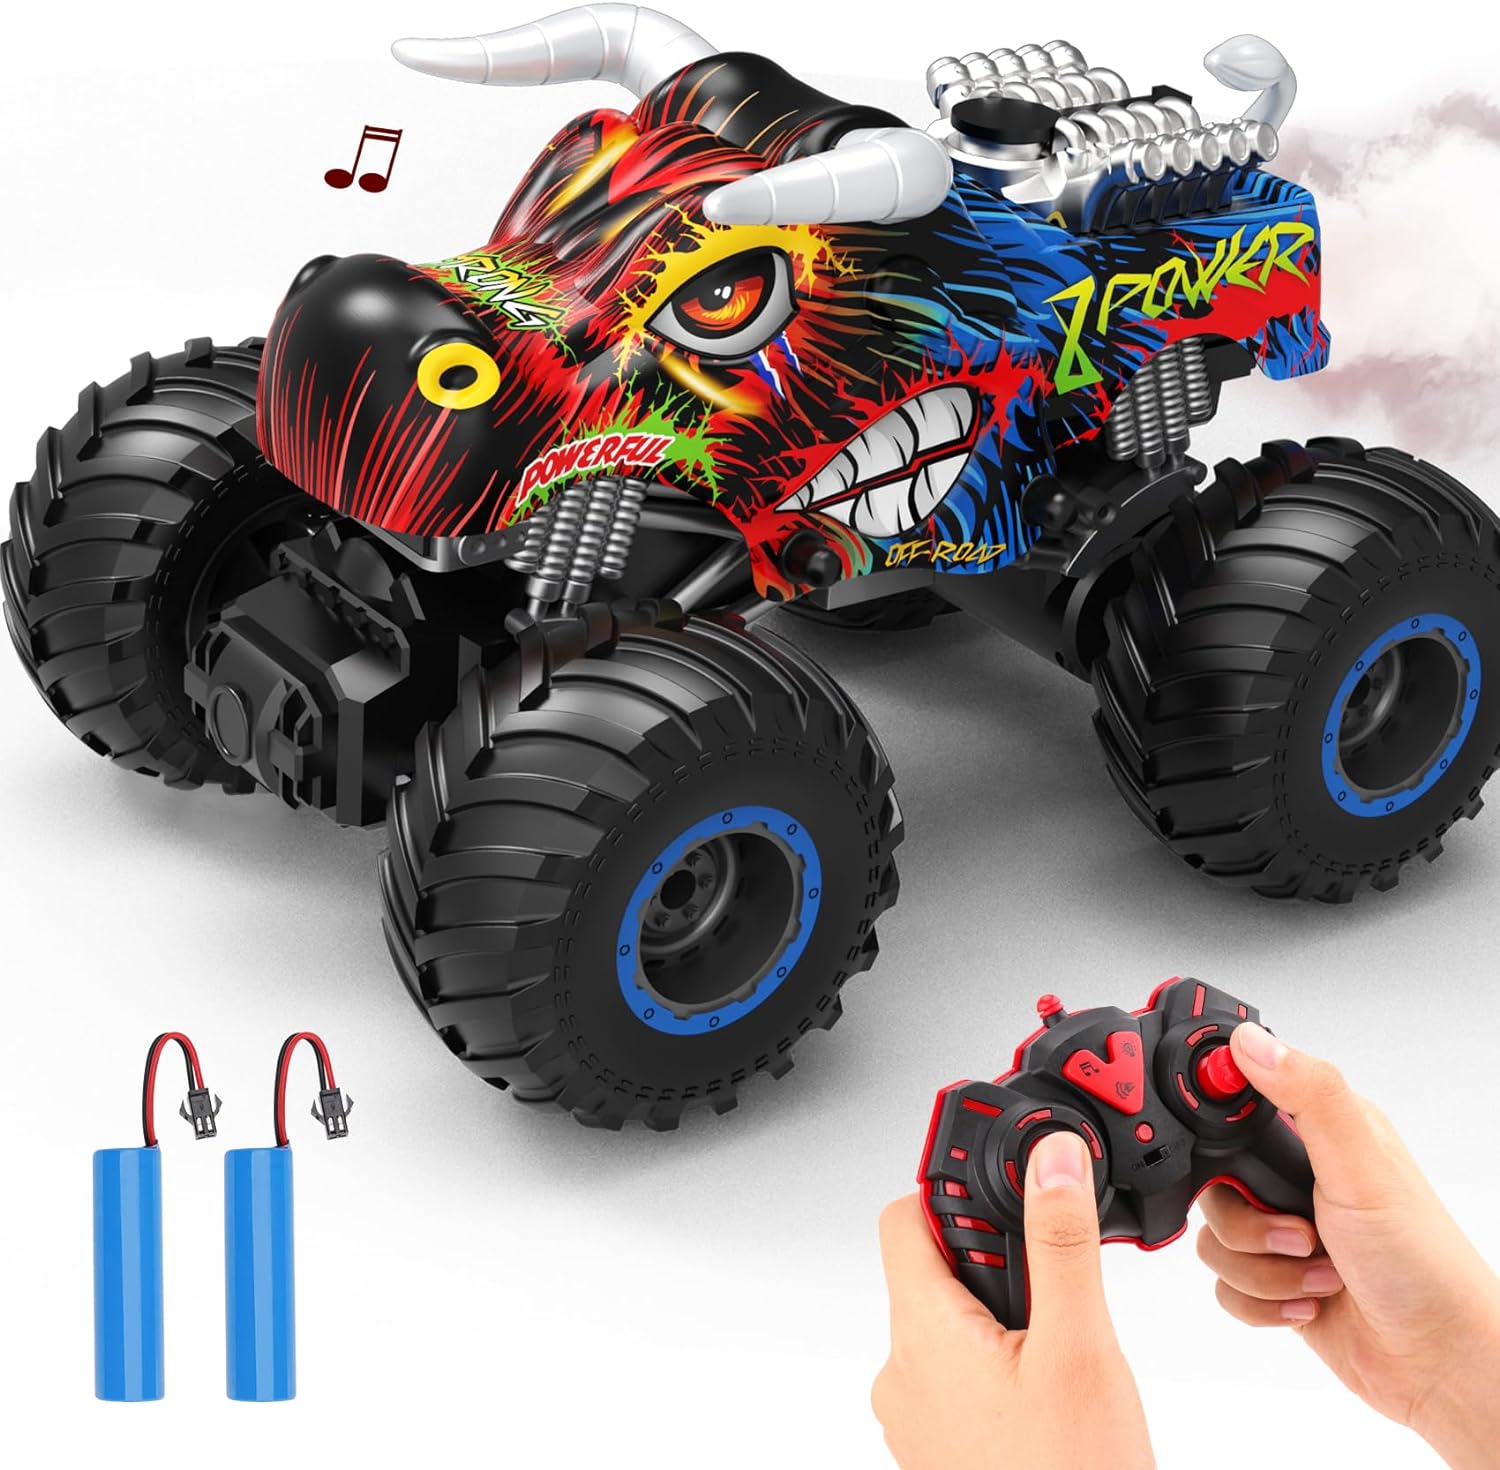 You are currently viewing NEXBOX Remote Control Monster Truck Review